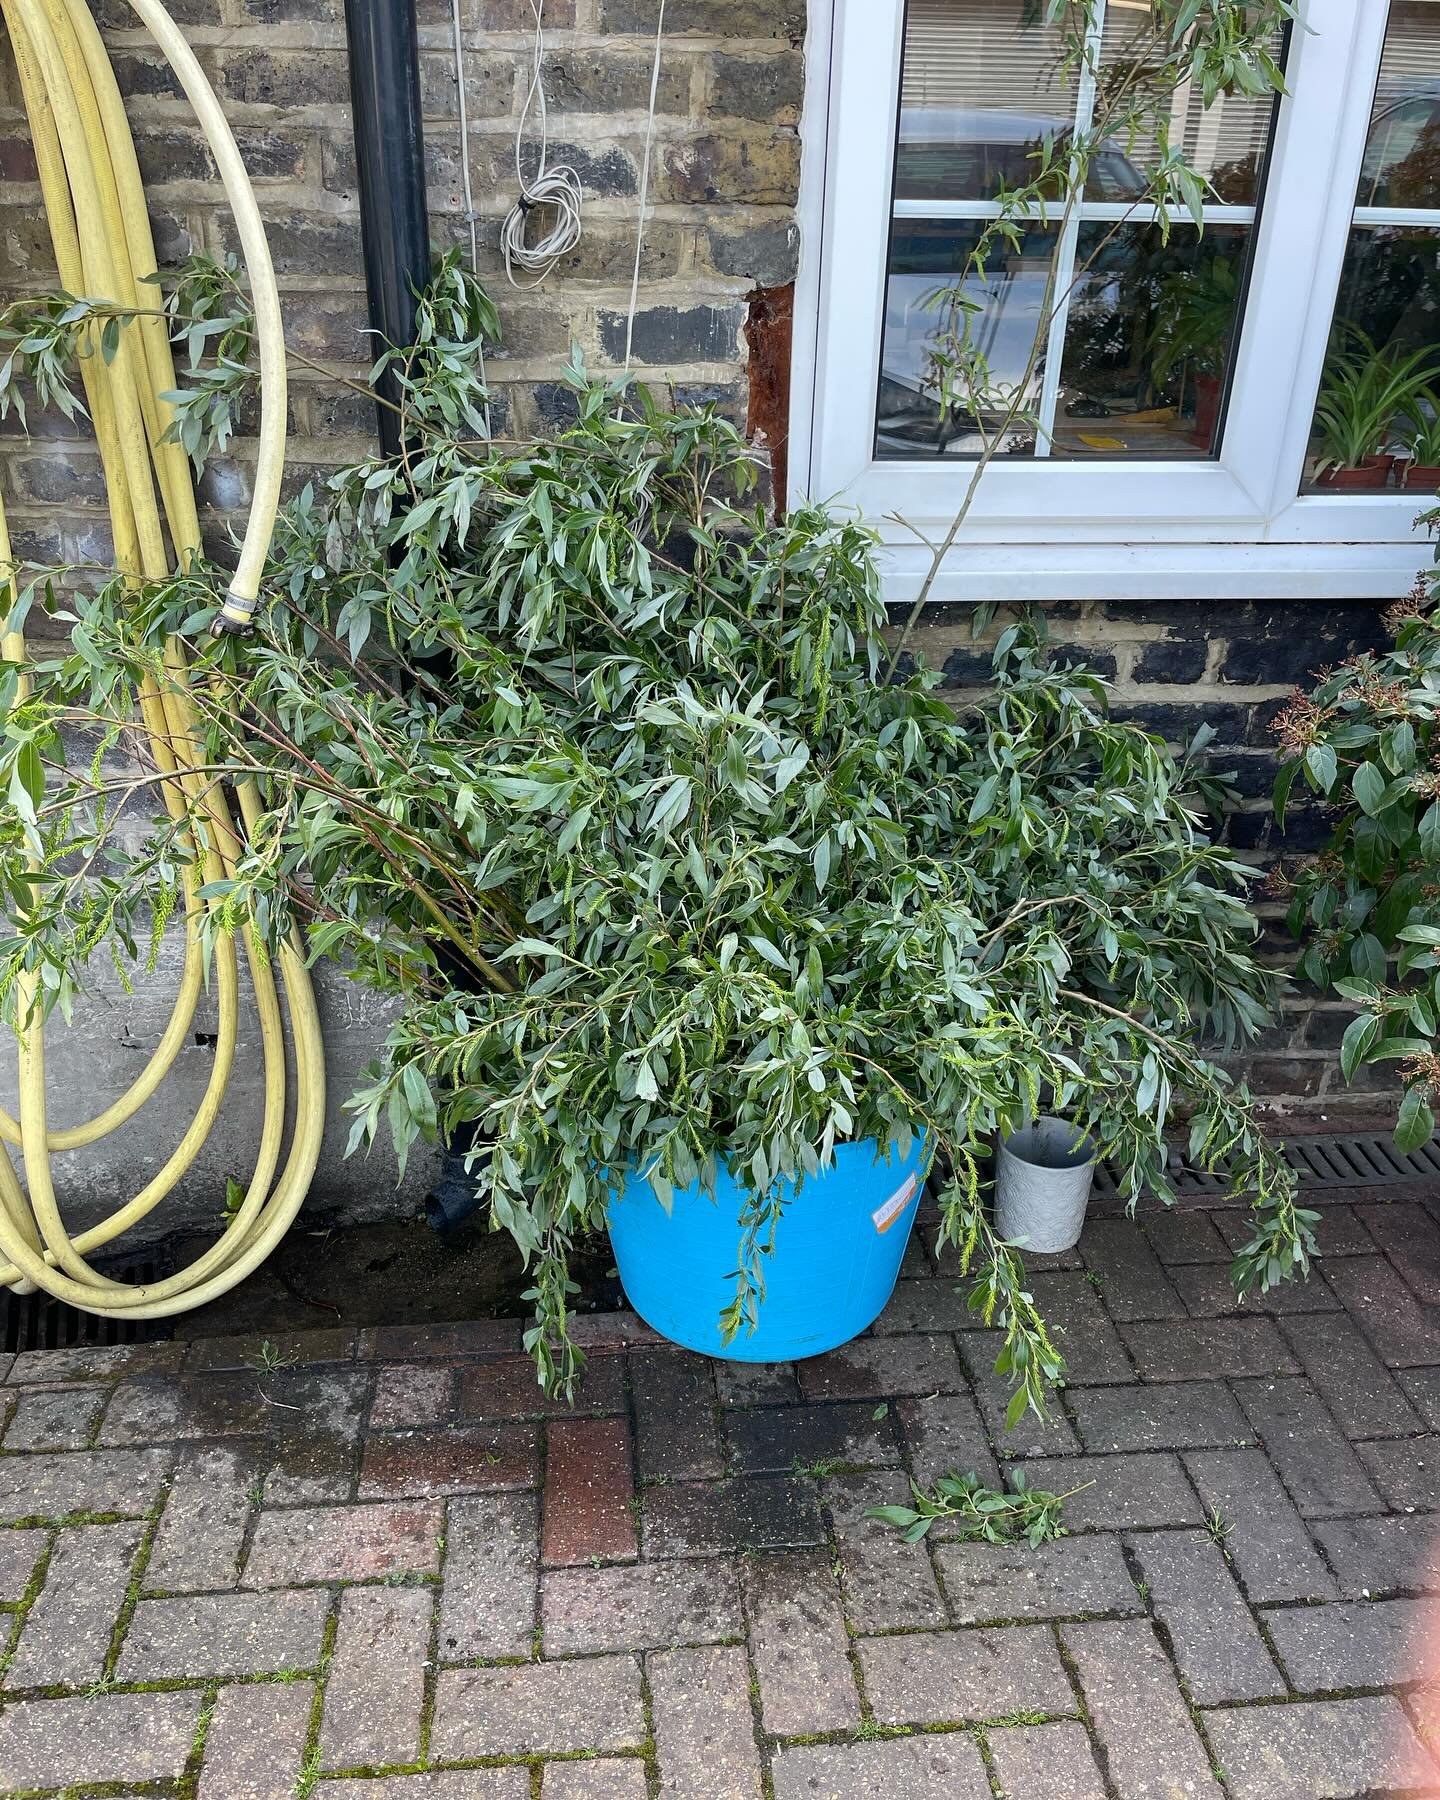 A bucket full of willow wands, salvaged from a fallen willow on Tooting Common, thanks to @enableparks and now waiting for use during the @batterseasociety &lsquo;beating the bounds&rsquo; event on Sun May 5th. 

A 9 mile walk around the old Batterse